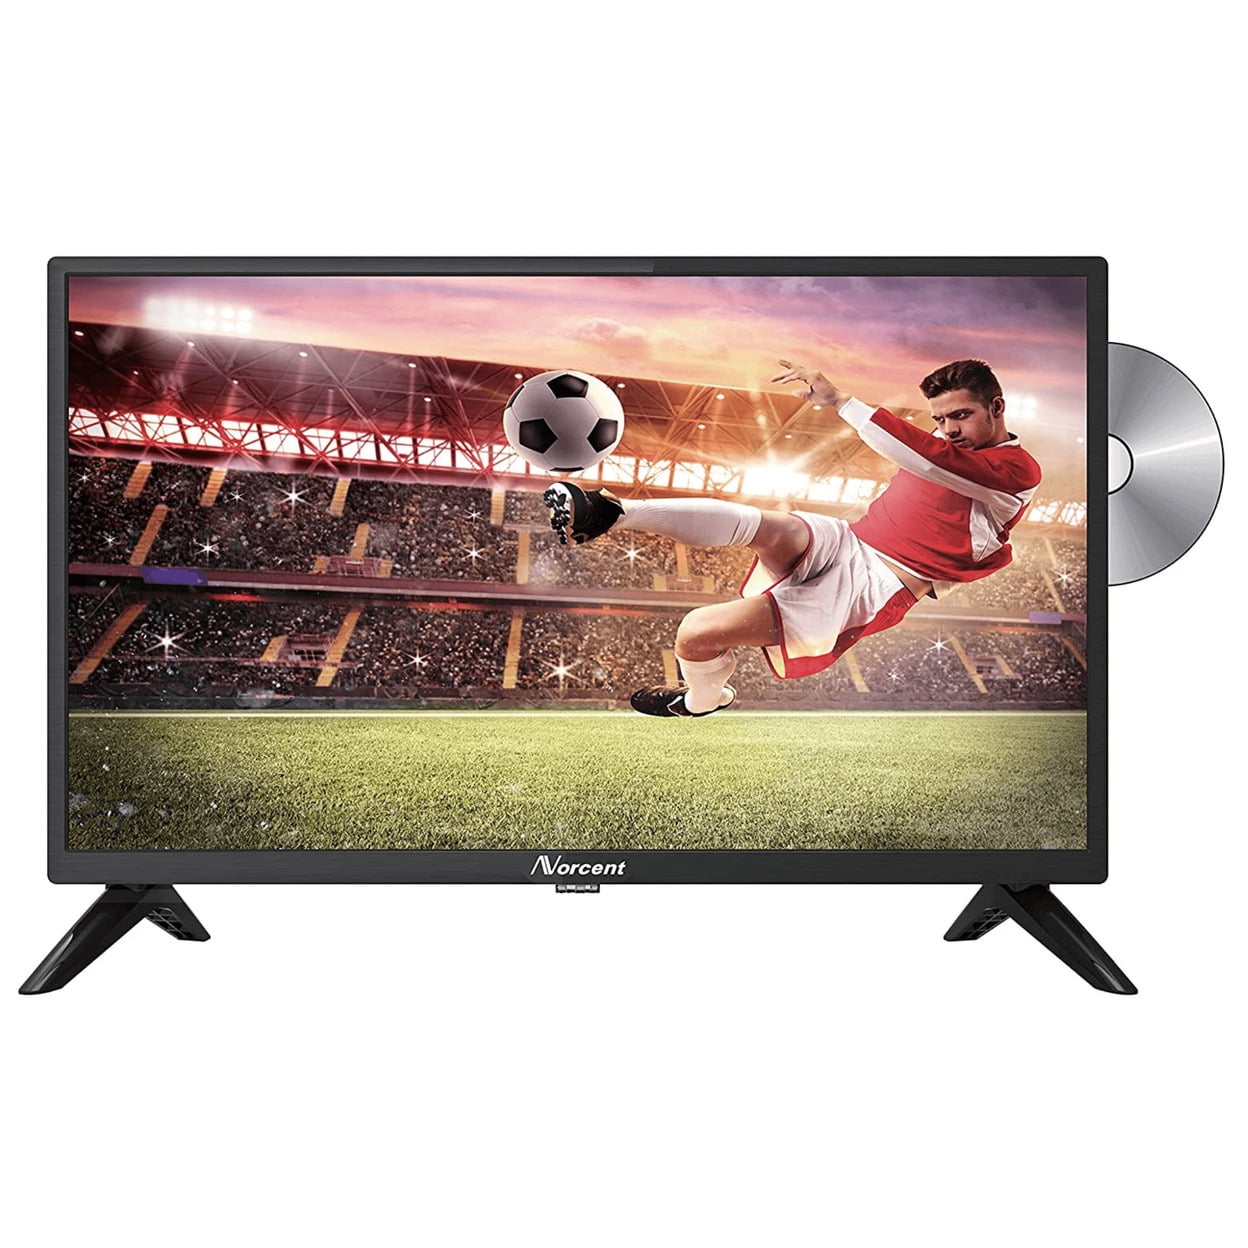 beFree Sound Portable Rechargeable 14 Inch LED TV with HDMI, SD/MMC, USB,  VGA, AV In/Out and Built-in Digital Tuner in Red 